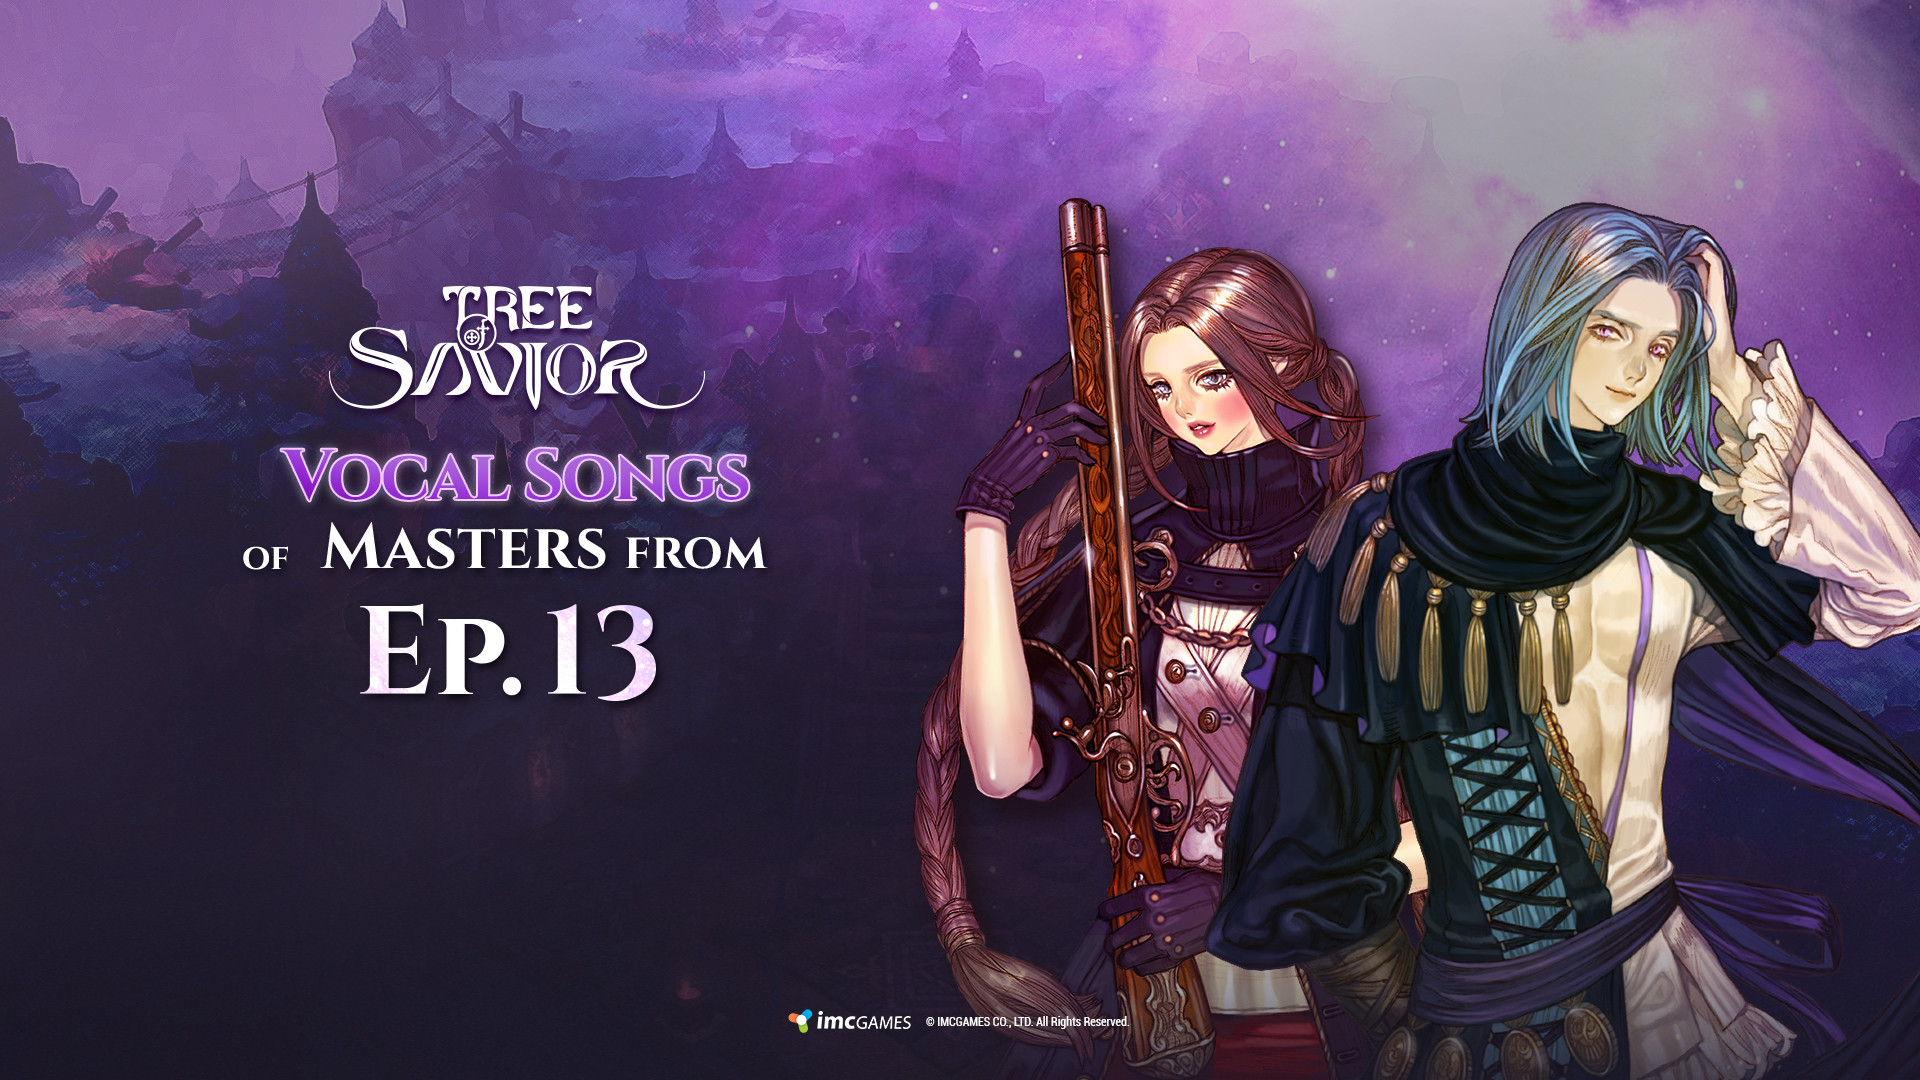 Tree of Savior - Vocal Songs of Masters from Ep.13 Featured Screenshot #1